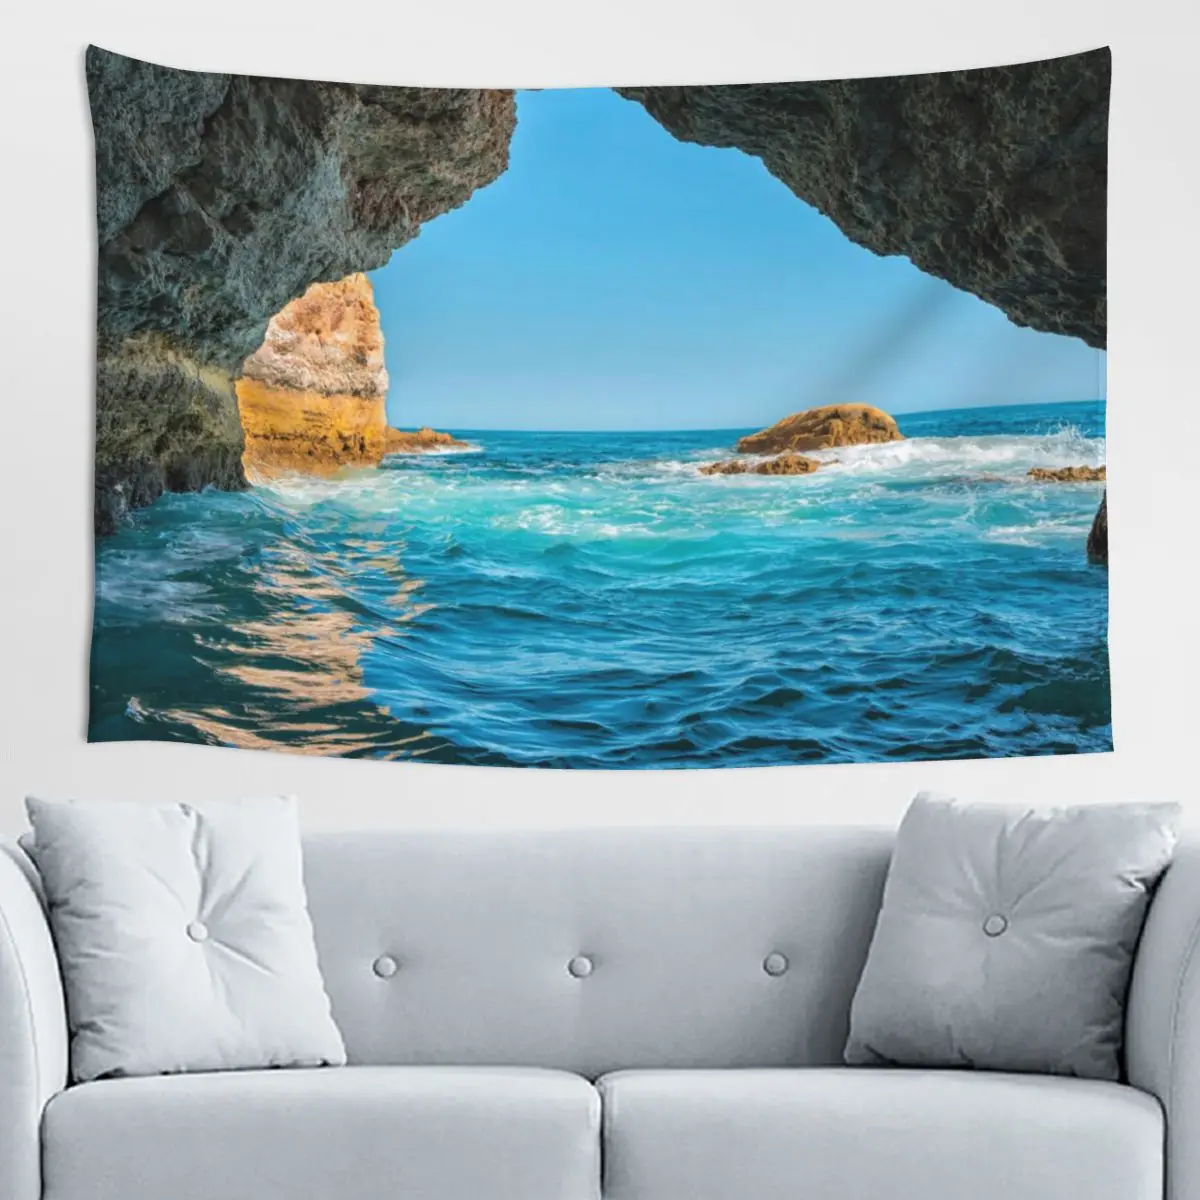 

Ocean Skin-Friendly Decor Portable Tapestry Wall Hanging Outdoor Ambiance Portable Decorate Picnic Cloth Lightweight Printing